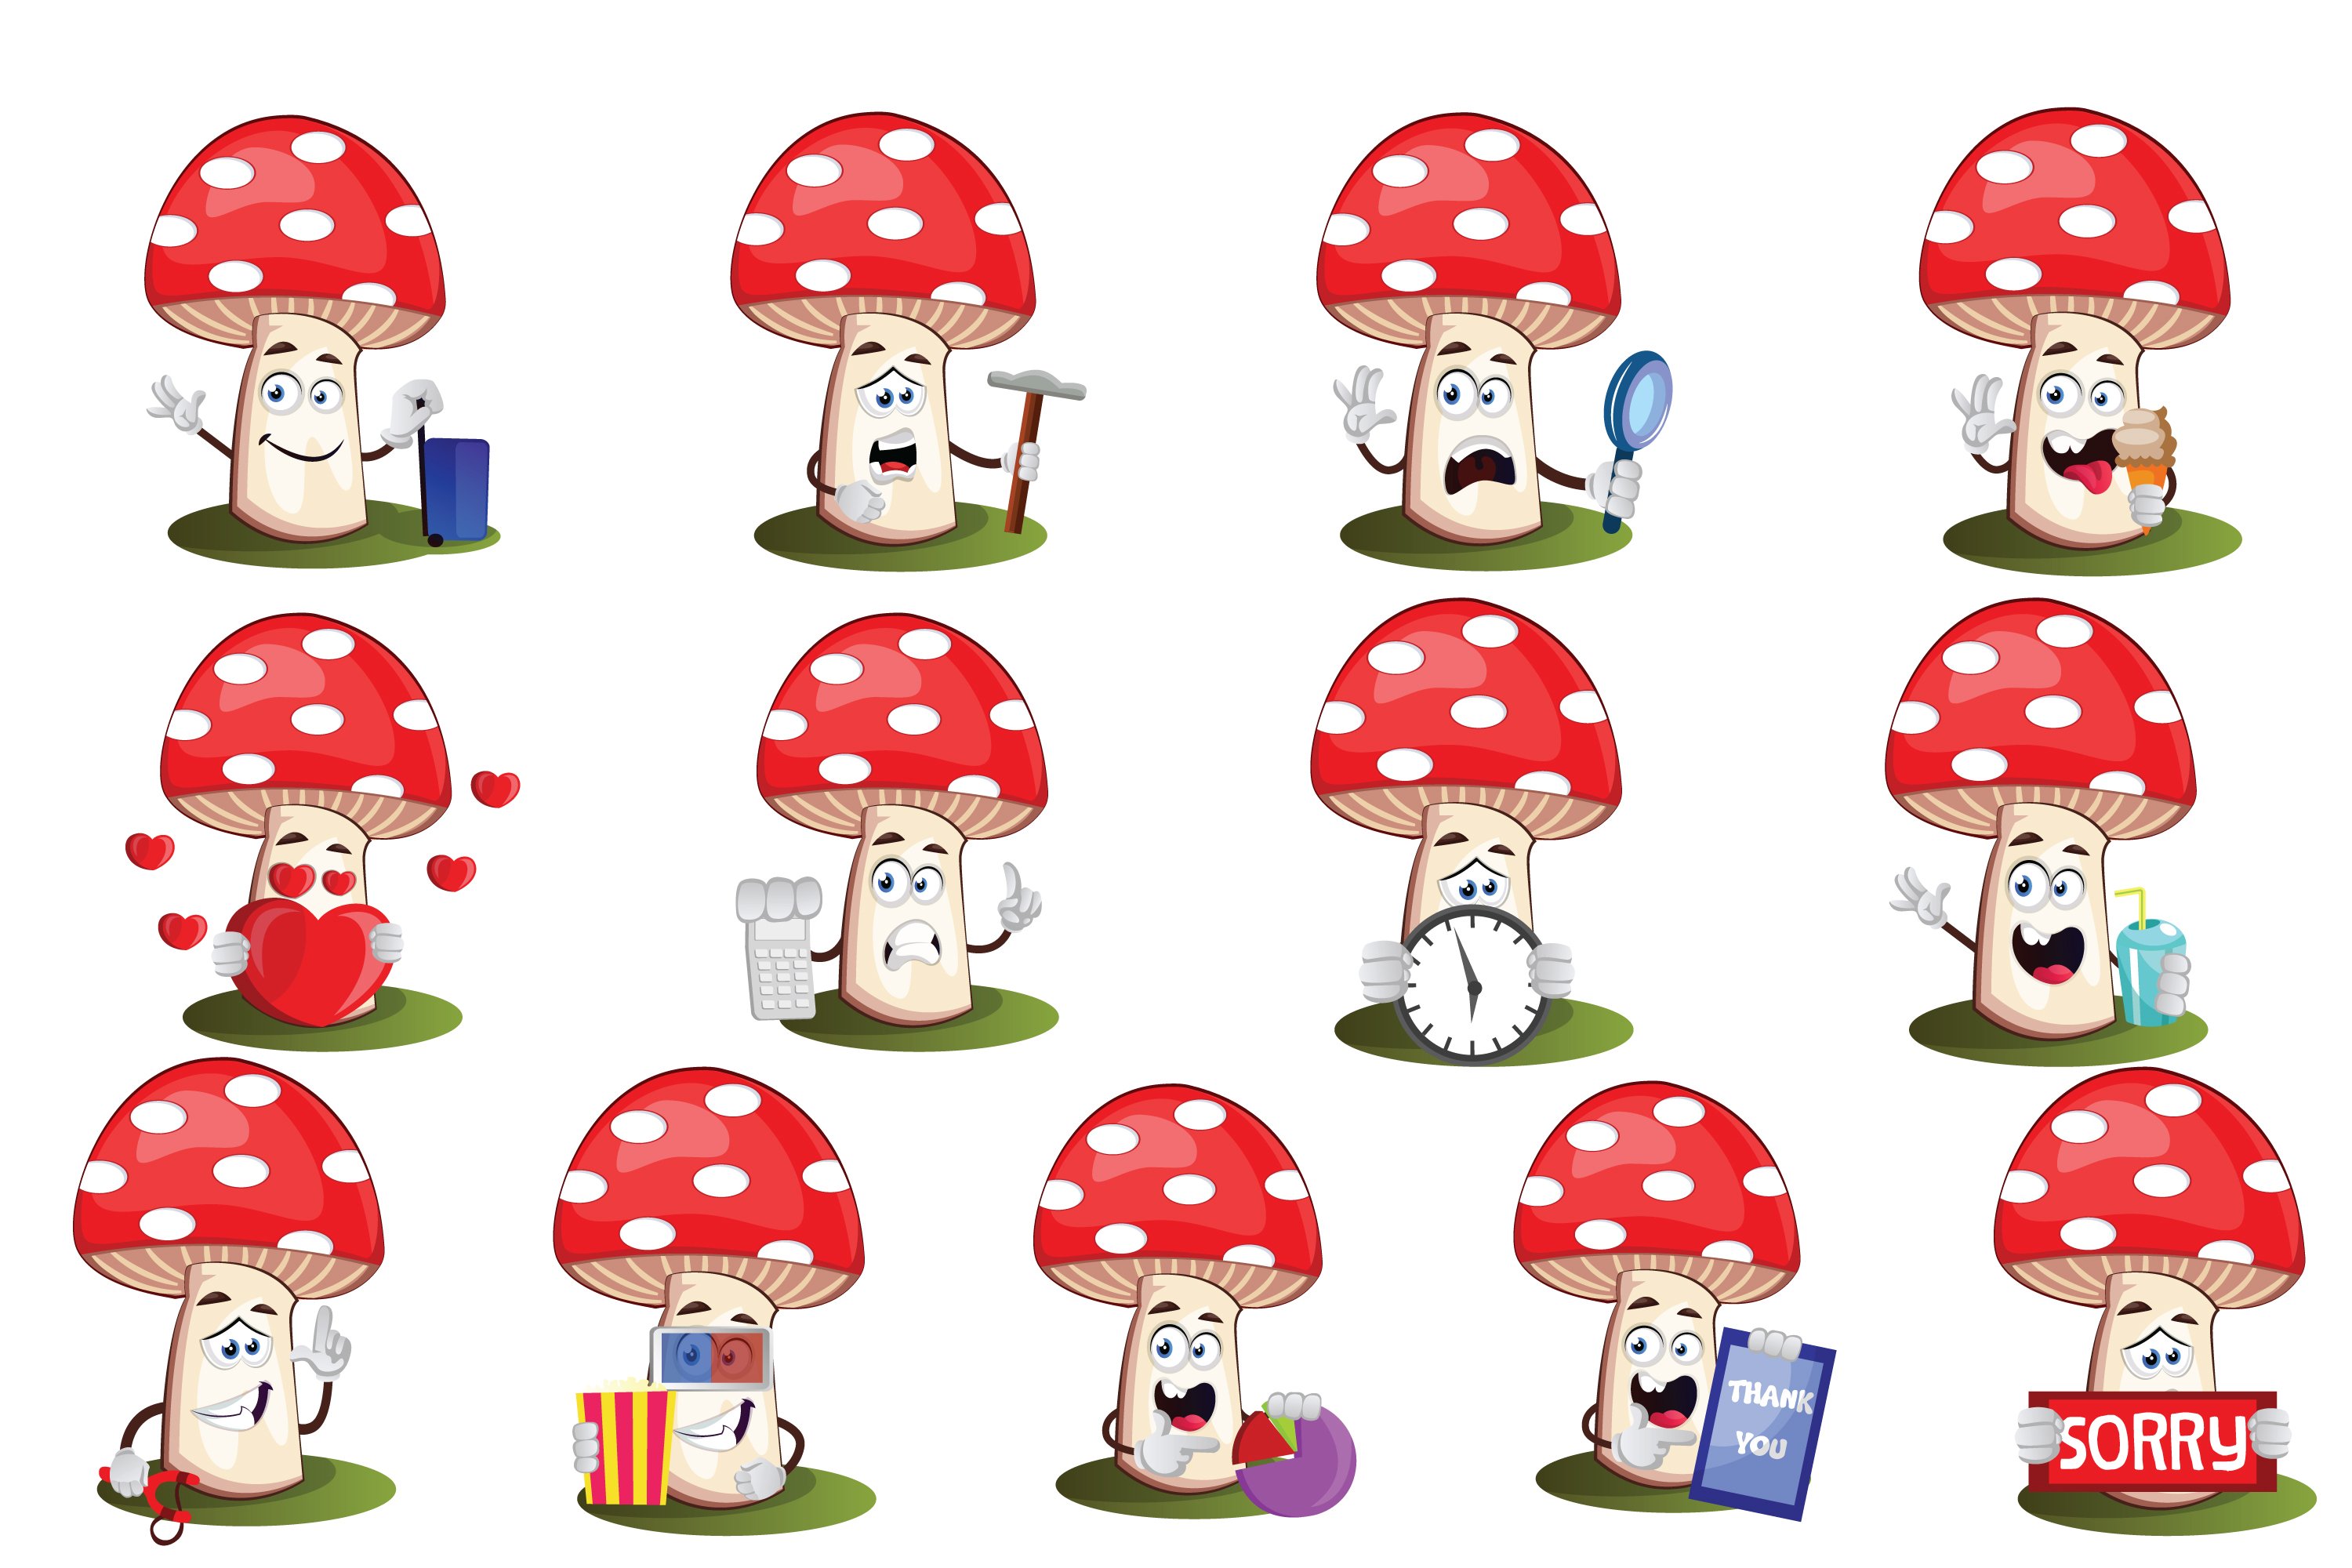 Mushroom collection in different life situation.